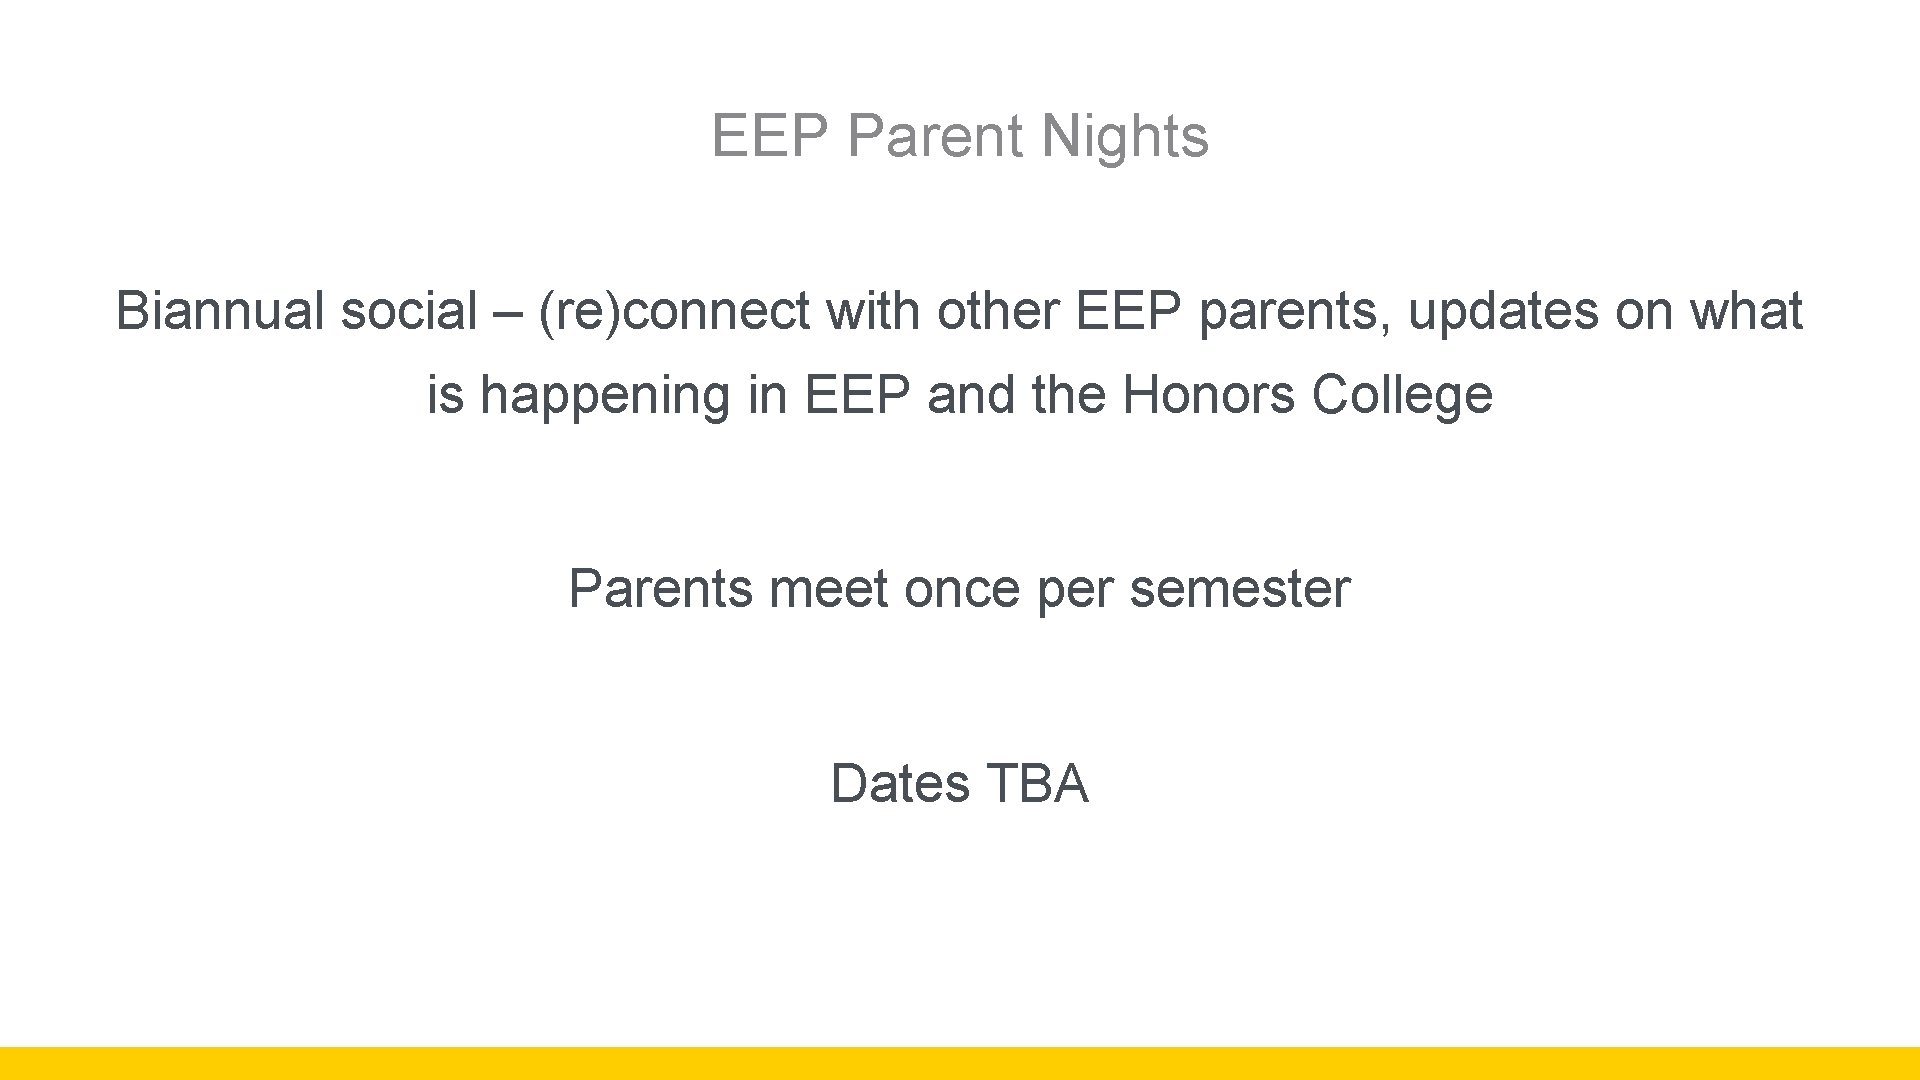 EEP Parent Nights Biannual social – (re)connect with other EEP parents, updates on what